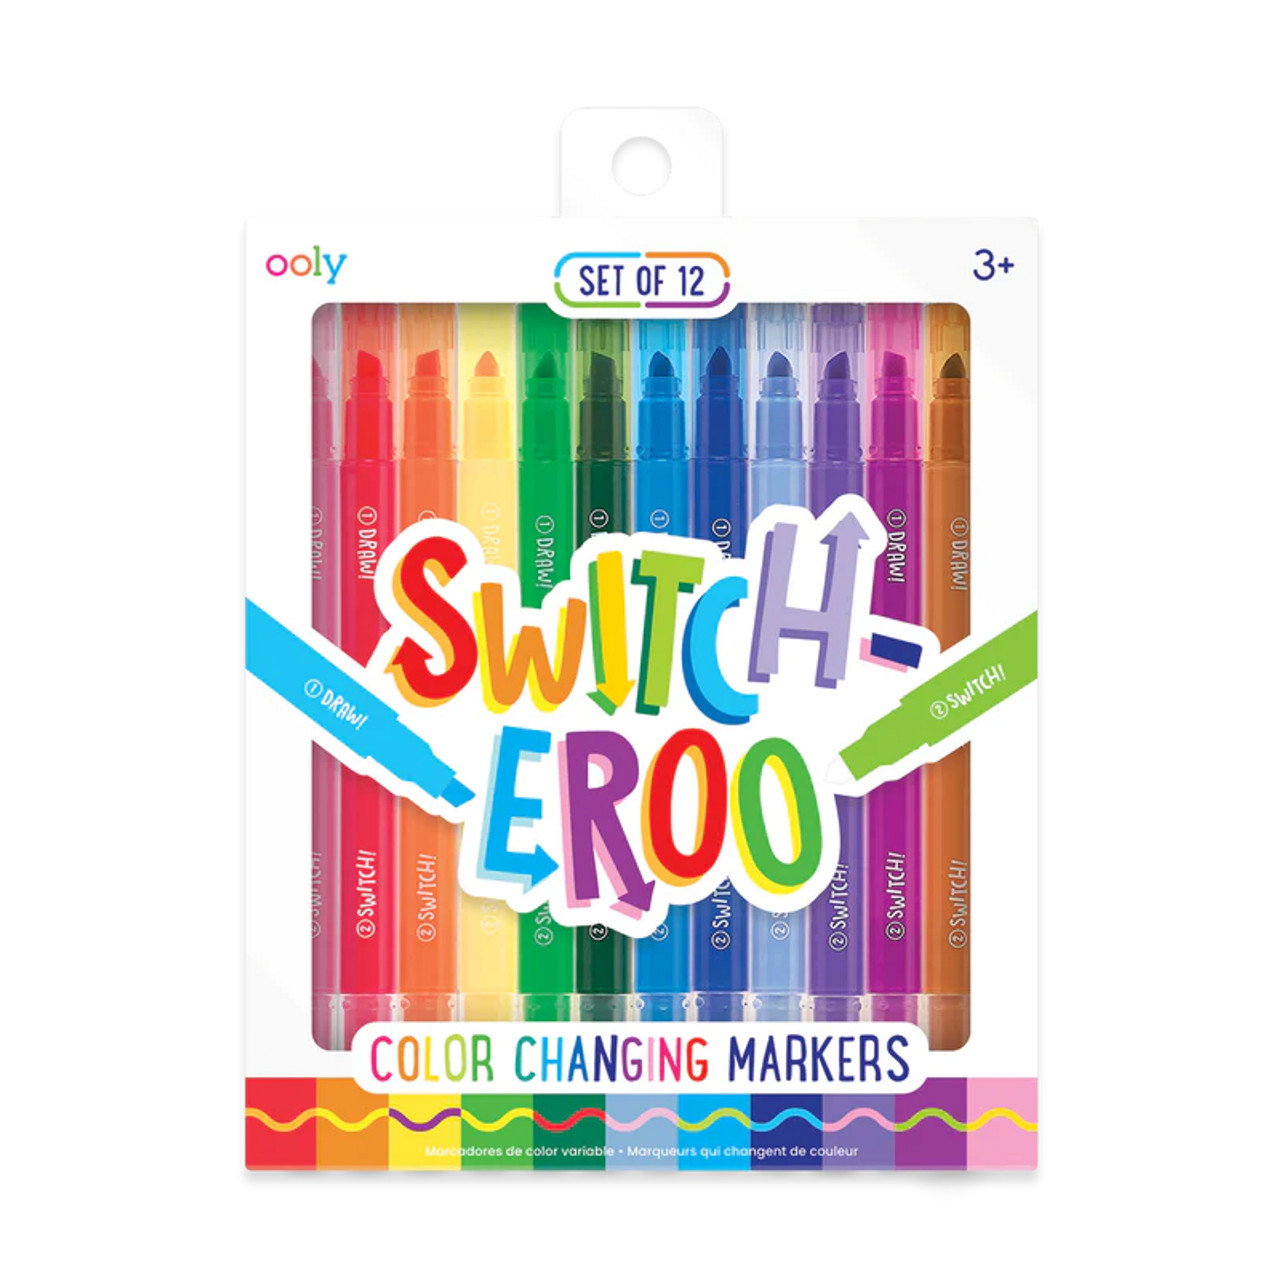 https://cdn11.bigcommerce.com/s-t1xw616ex9/images/stencil/1280x1280/products/6698/11878/130-072-Switch-Eroo-Color-Changing-Markers-C1_800x800__45473.1658363636.jpg?c=2